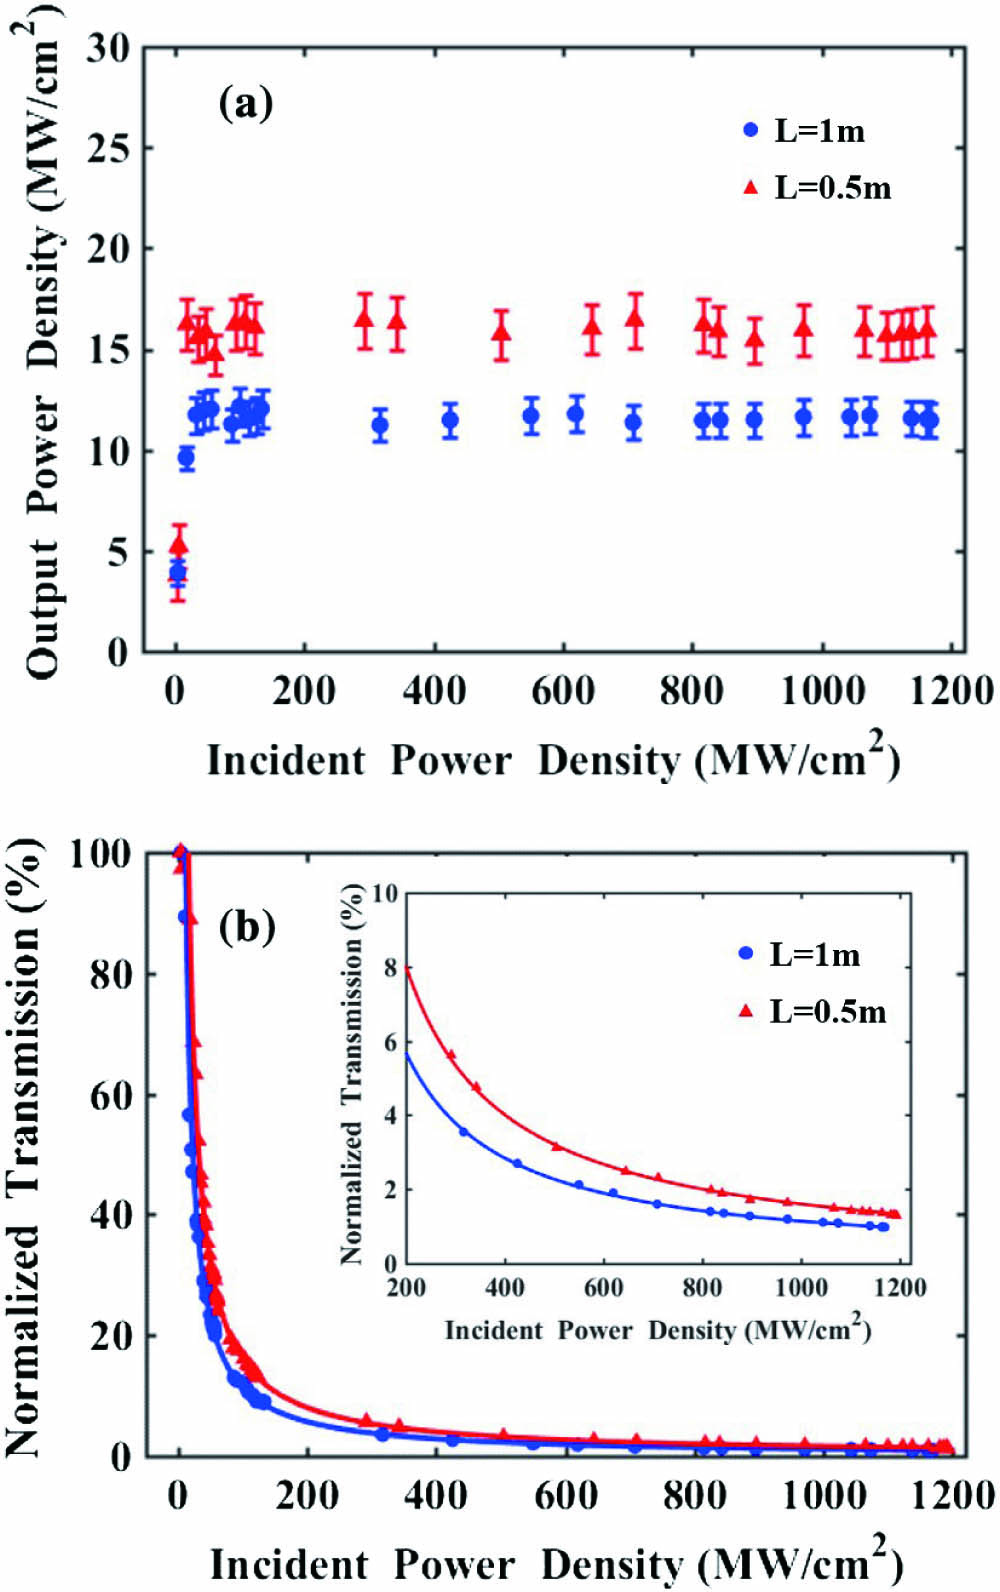 NOL experimental results of As2Se3 fibers with the length of 1 m and 0.5 m. (a) Output power density increases with the incident power density. (b) Normalized transmission decreases with the incident intensity.